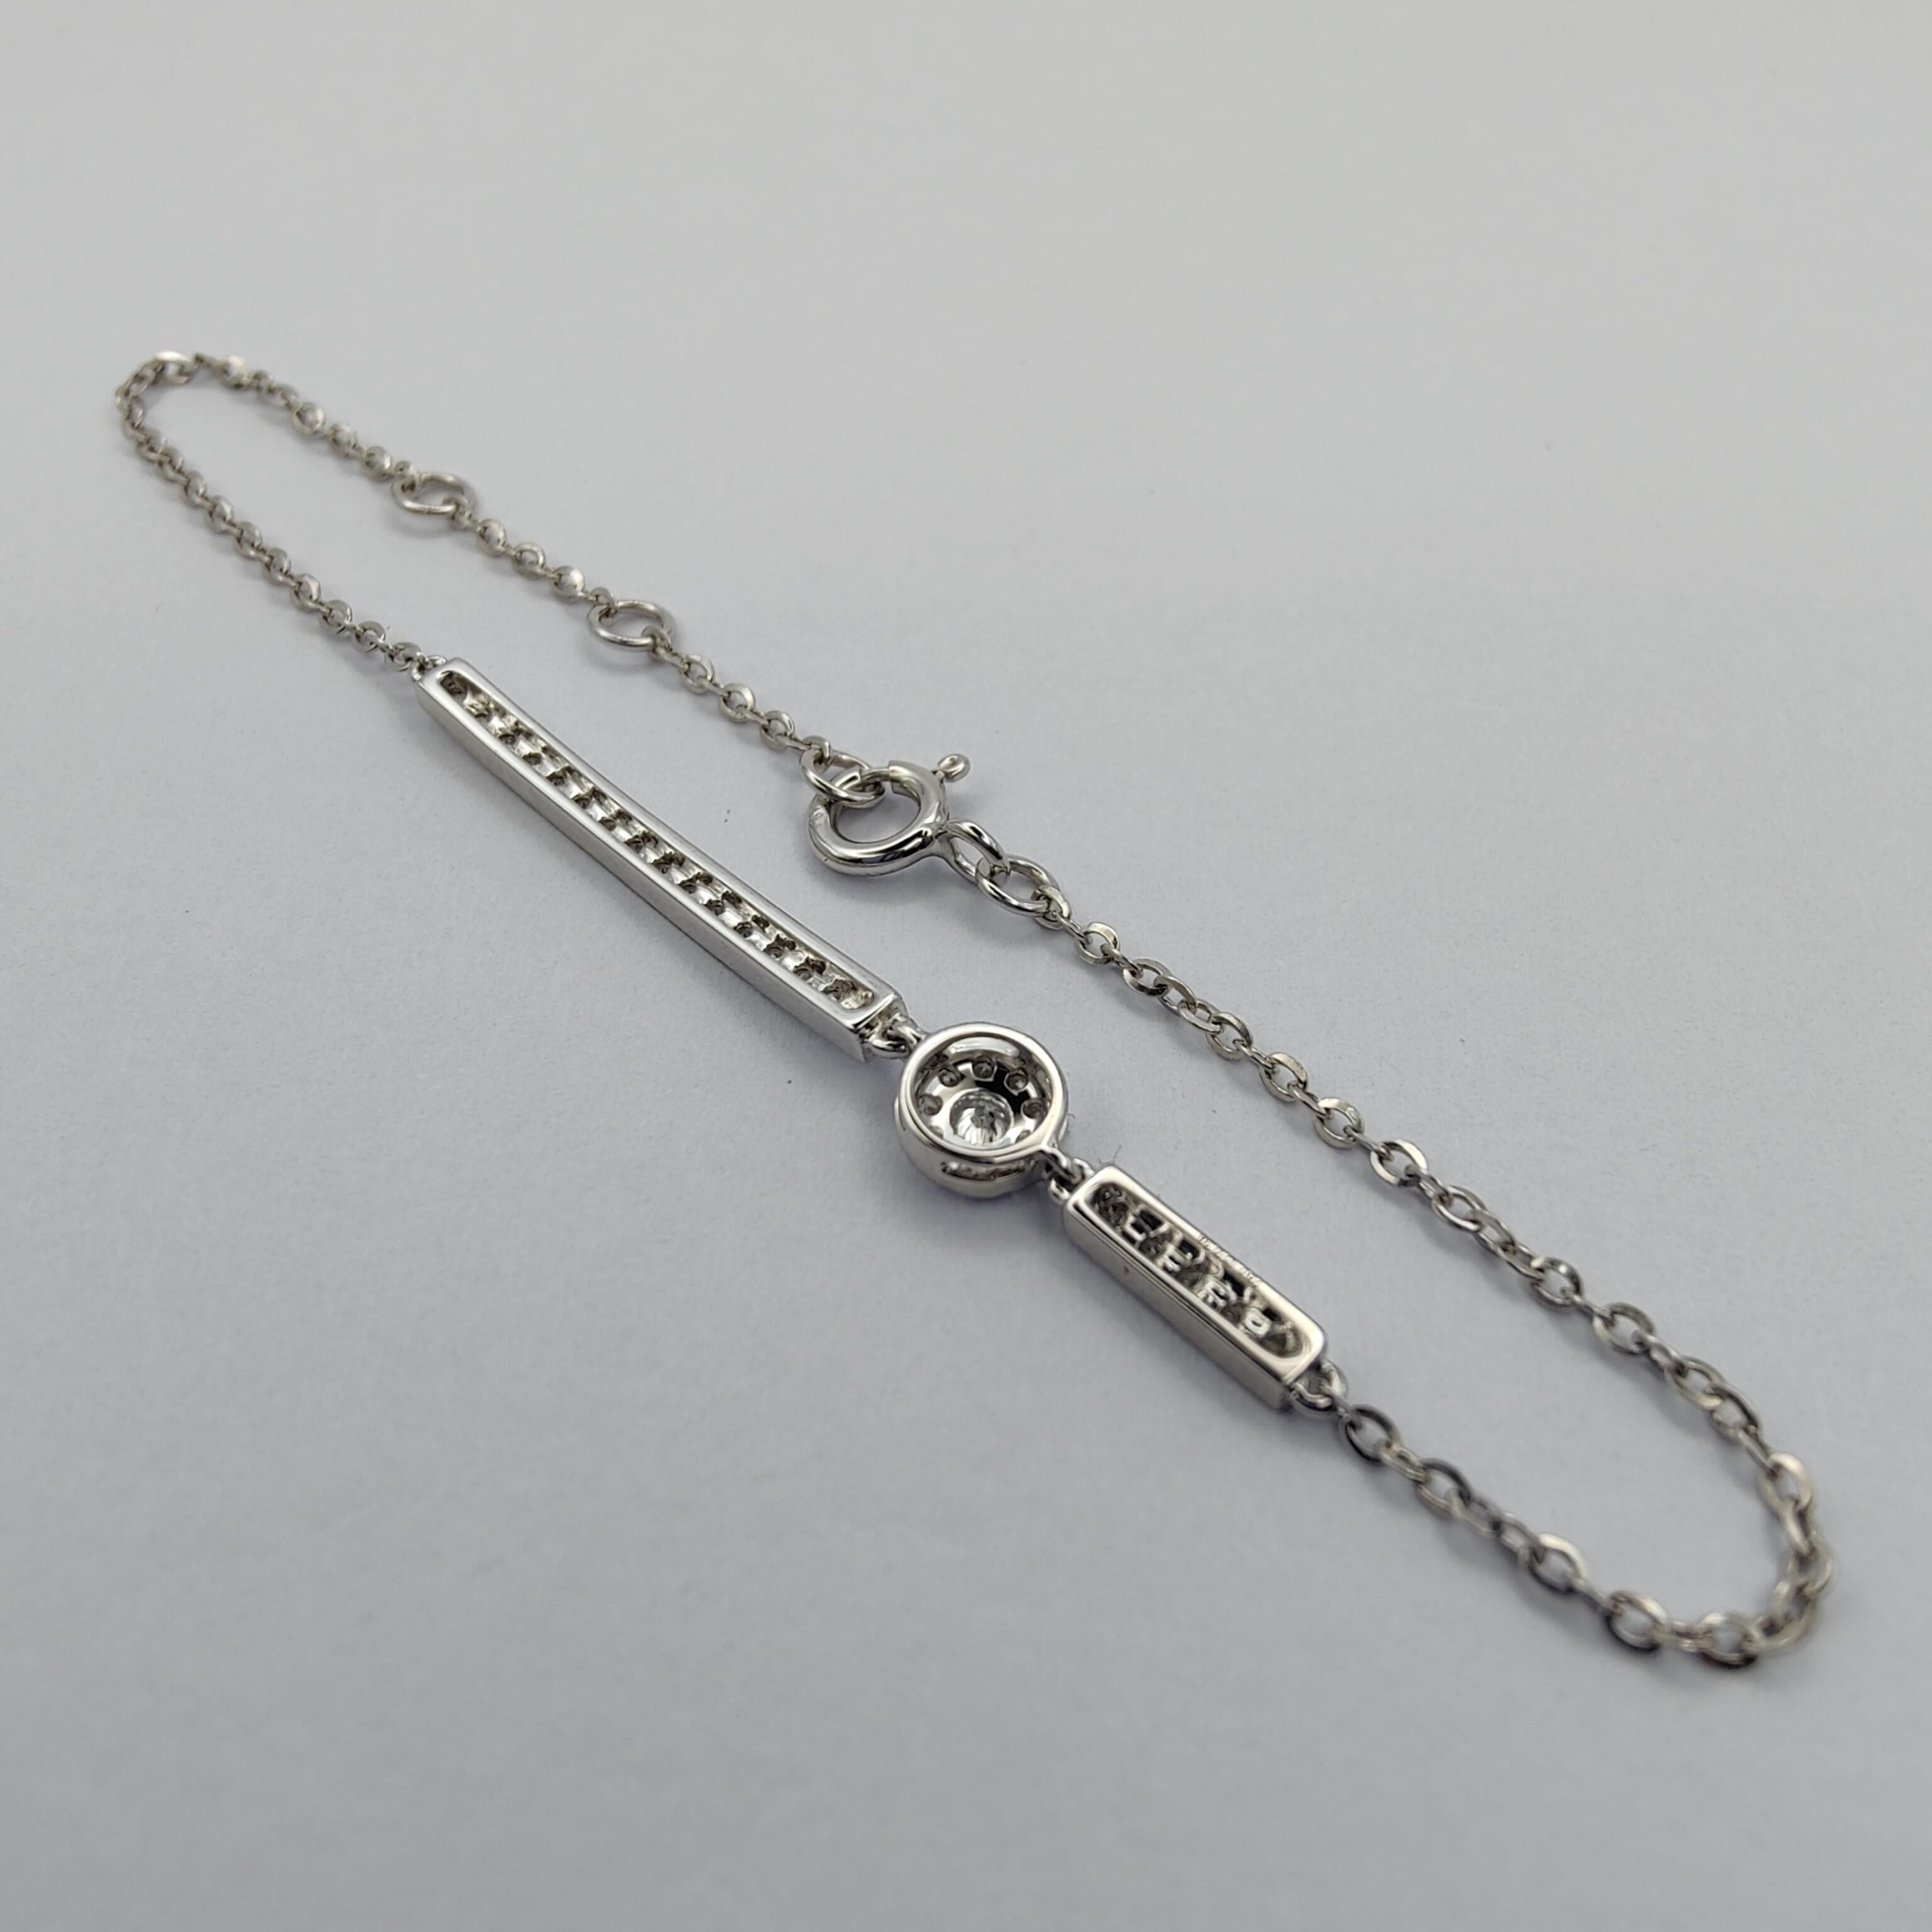 This elegant diamond bracelet is the perfect accessory for anybody looking to add a touch of sparkle to her everyday look. The bracelet is made of 18k white gold and features a delicate chain adorned with 31 sparkling diamonds, including a single